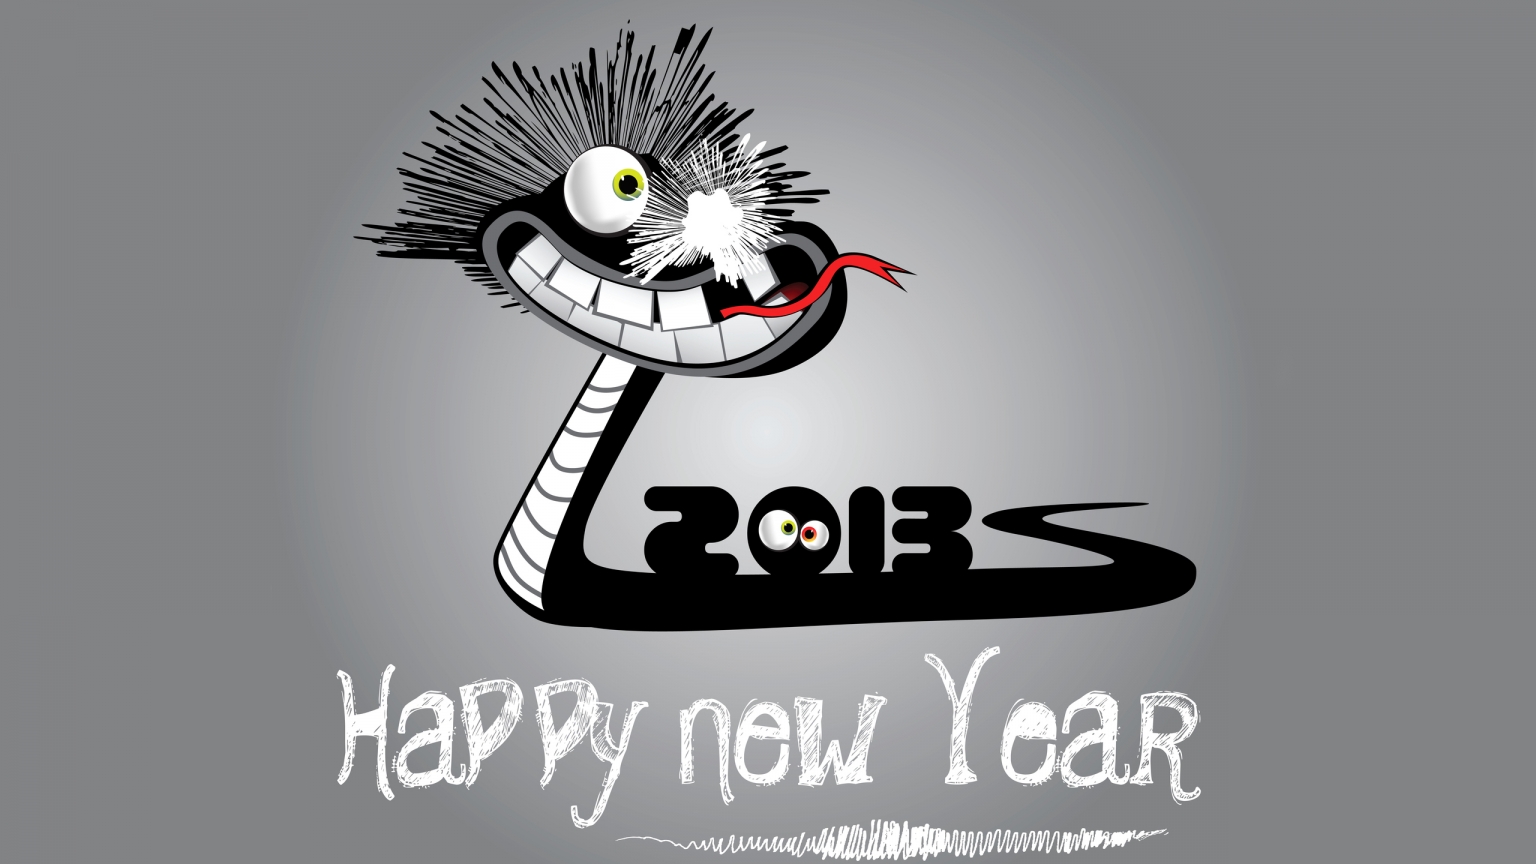 2013 Happy New Year for 1536 x 864 HDTV resolution